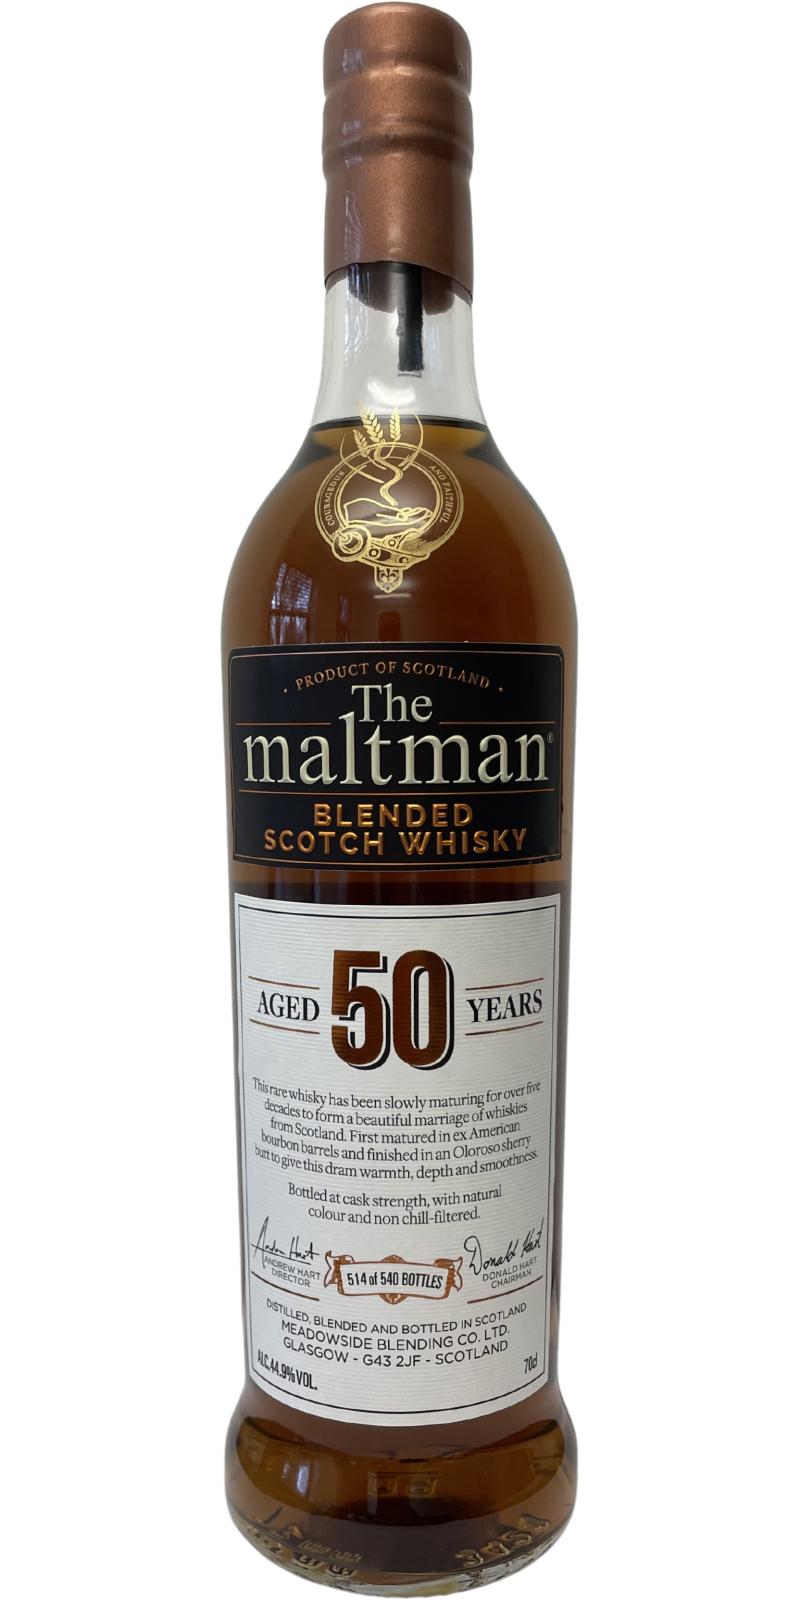 Maltman Blended Scotch Whisky 50 Years